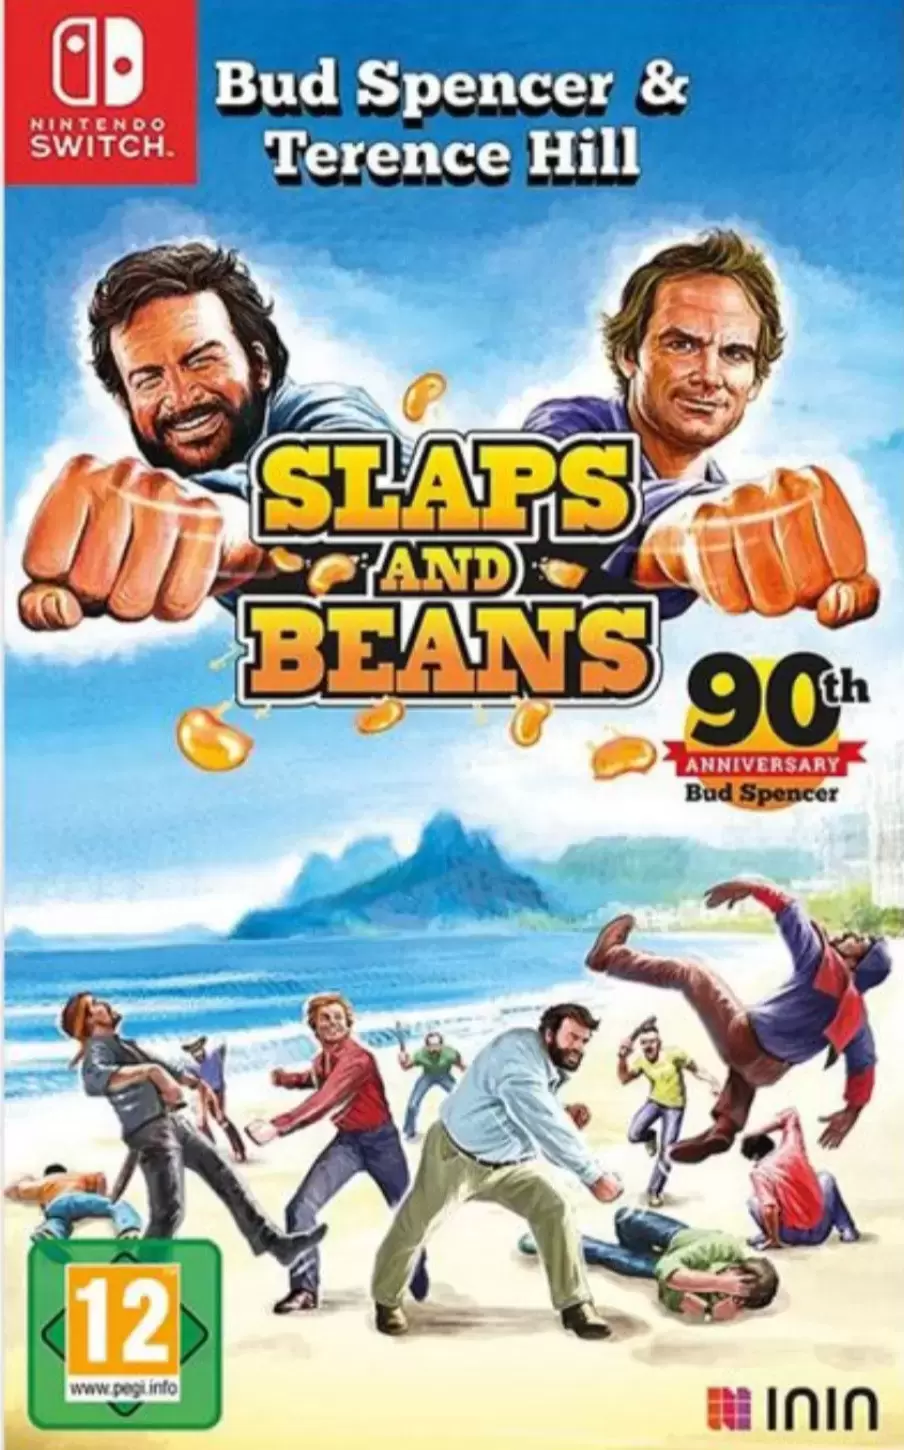 Nintendo Switch Games - Bud Spencer & Terence Hill - Slaps And Beans